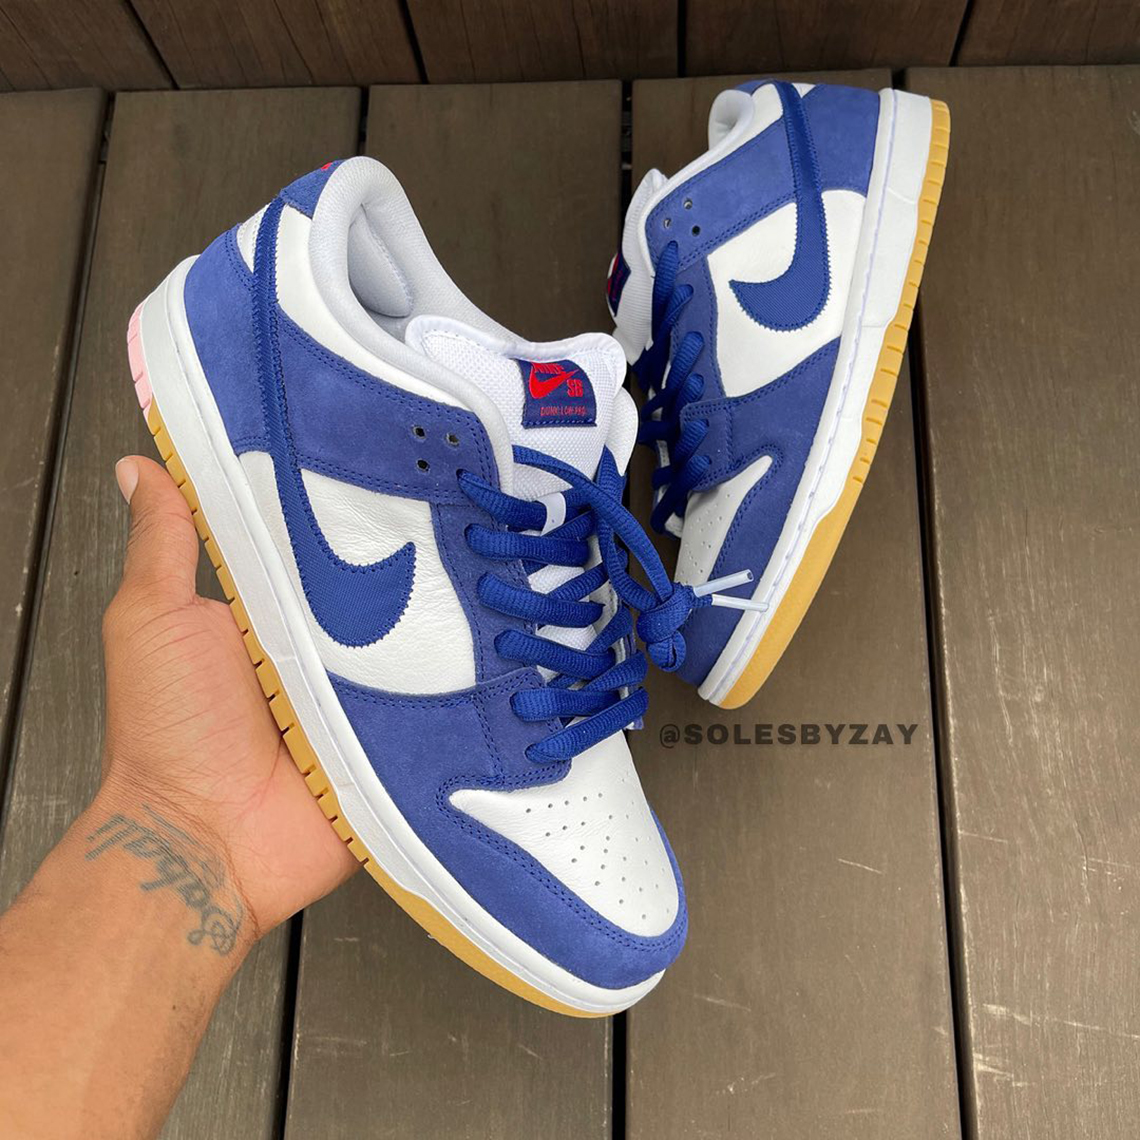 SB Dunk Low Los Angeles Dodgers Nike clean and neat sneaker for